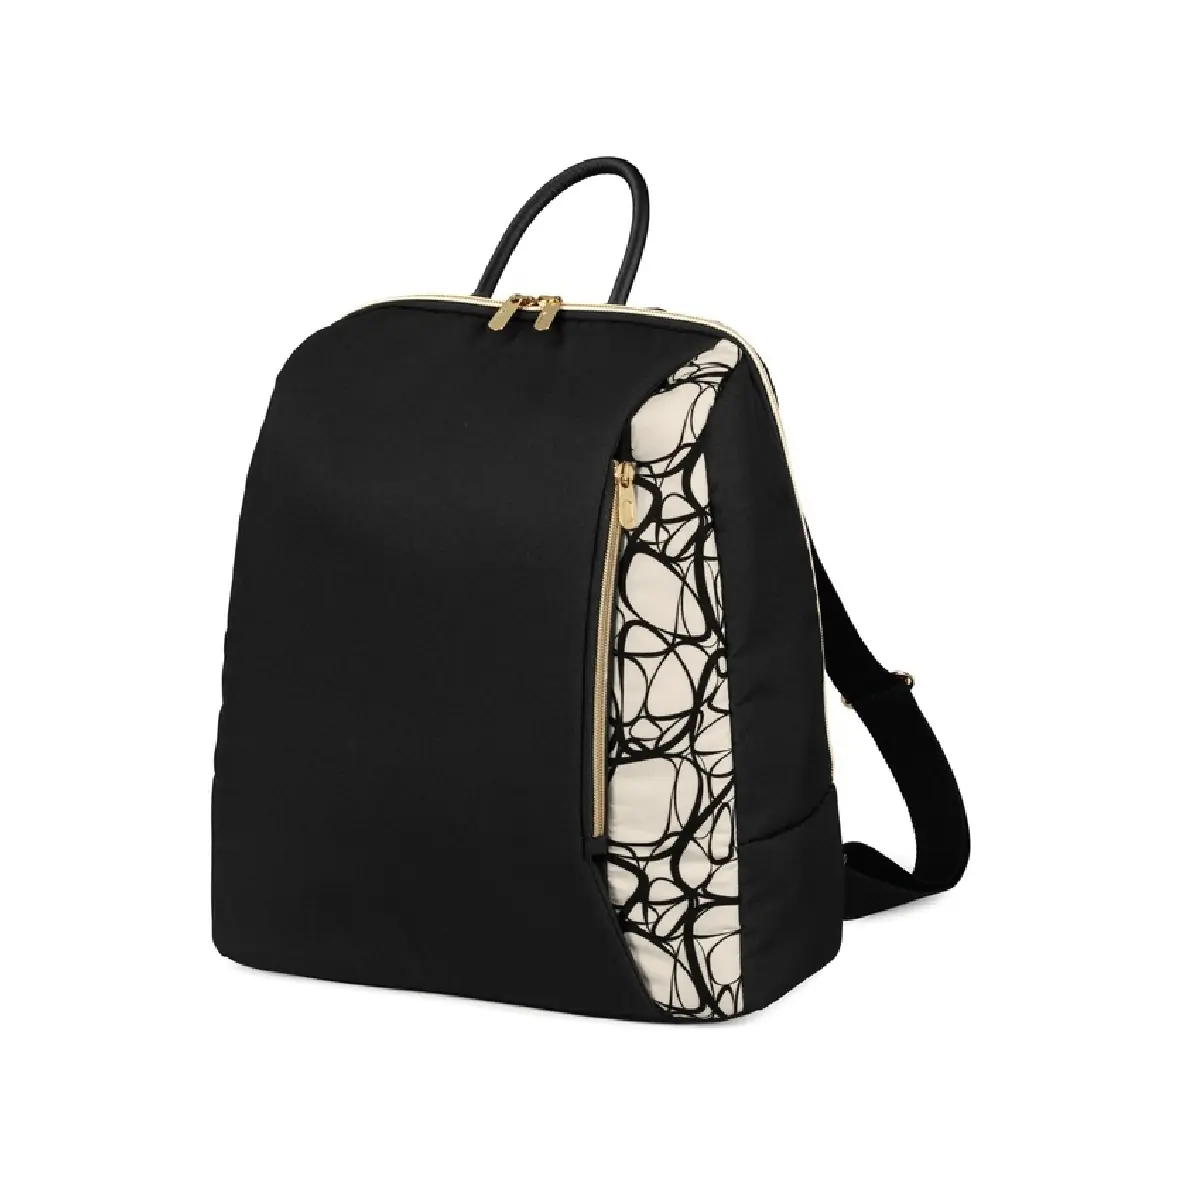 Image of Peg Perego Backpack Changing Bag-Graphic Gold